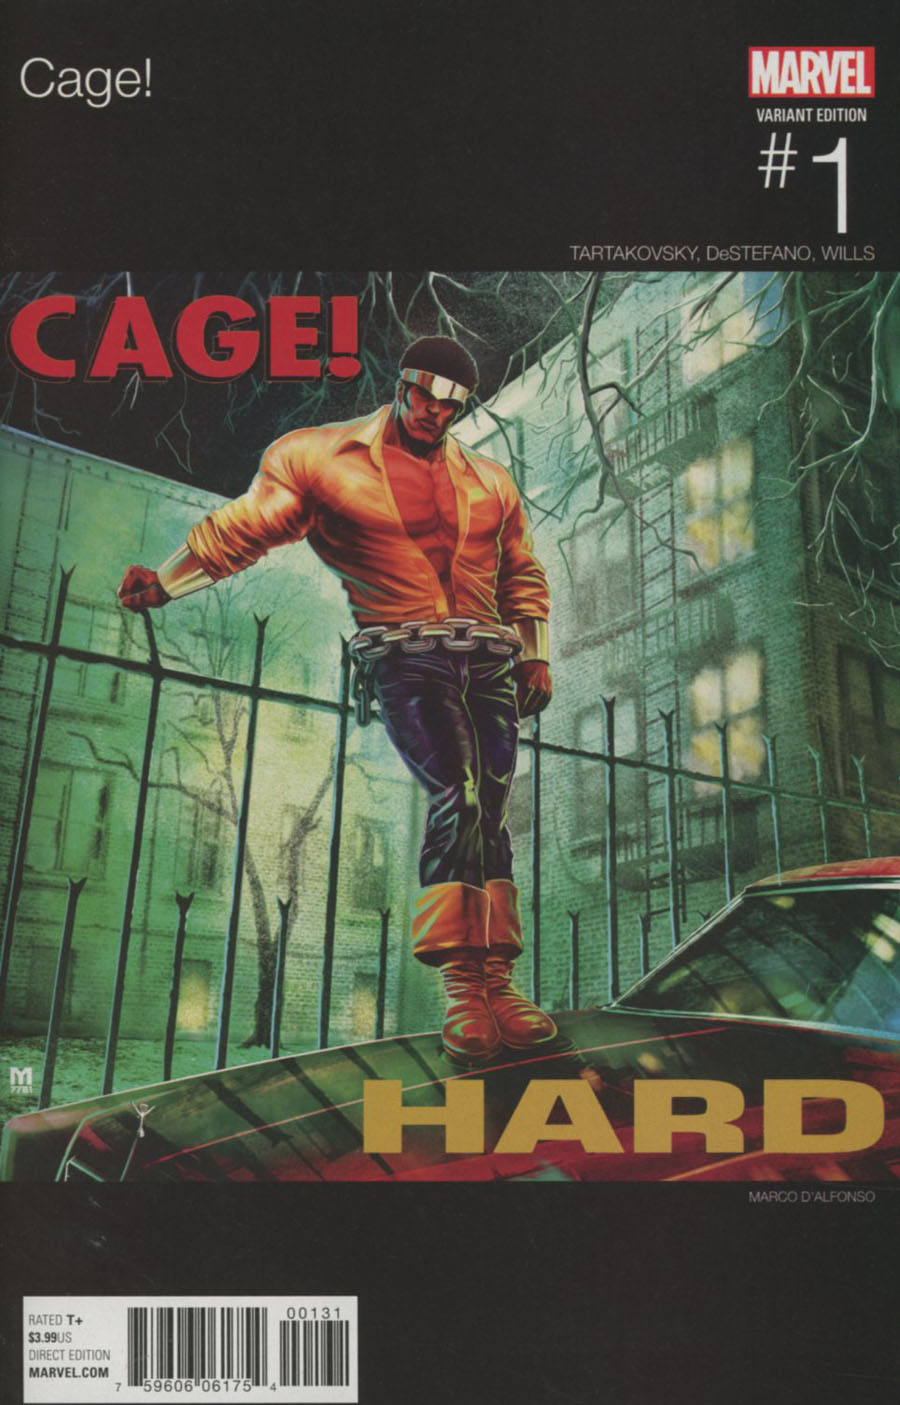 Cage Vol 3 #1 Cover B Variant Marco DAlfonso Marvel Hip-Hop Cover (Marvel Now Tie-In)